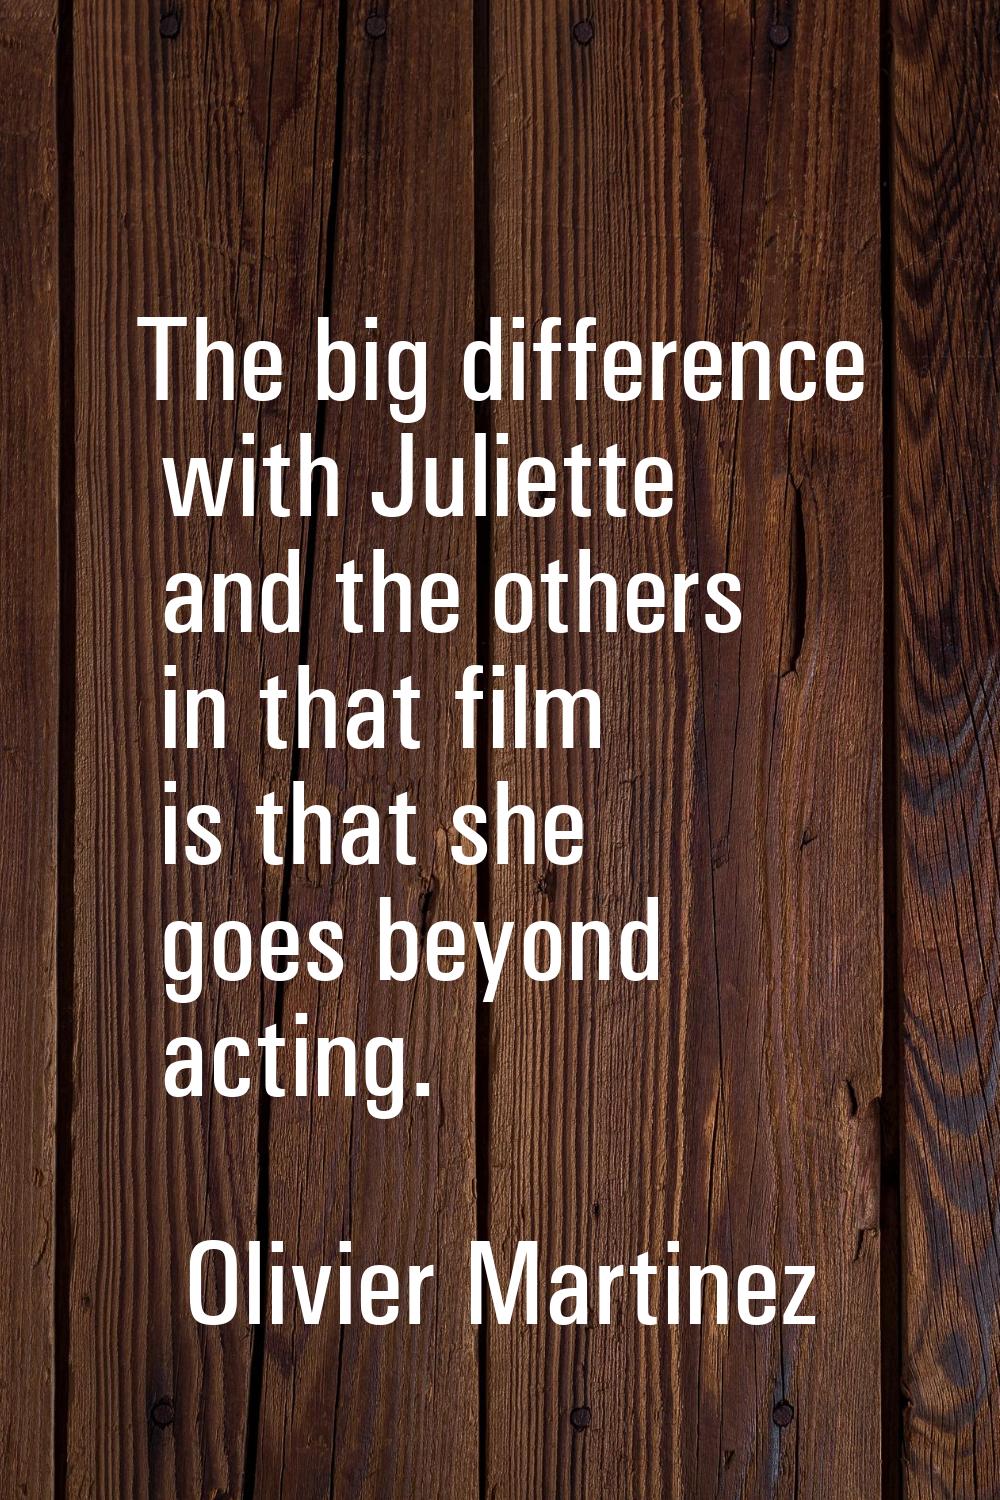 The big difference with Juliette and the others in that film is that she goes beyond acting.